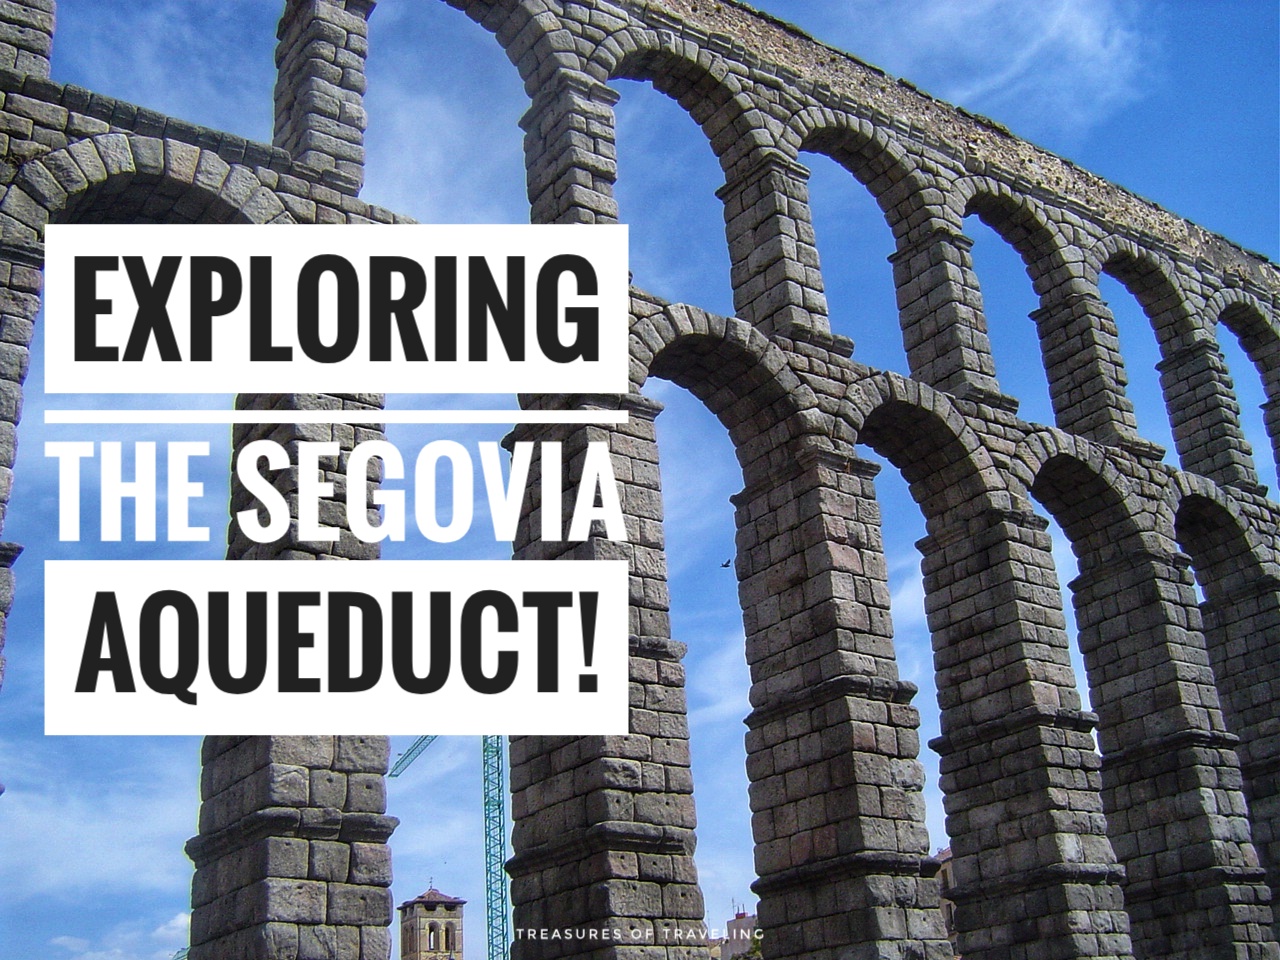 Segovia is a wonderful Spanish city to visit full of culture, history and treasures of traveling. Come explore Segovia’s most famous landmark; the Roman aqueduct. It is one of the most well preserved in Europe and is a stunning architectural masterpiece.